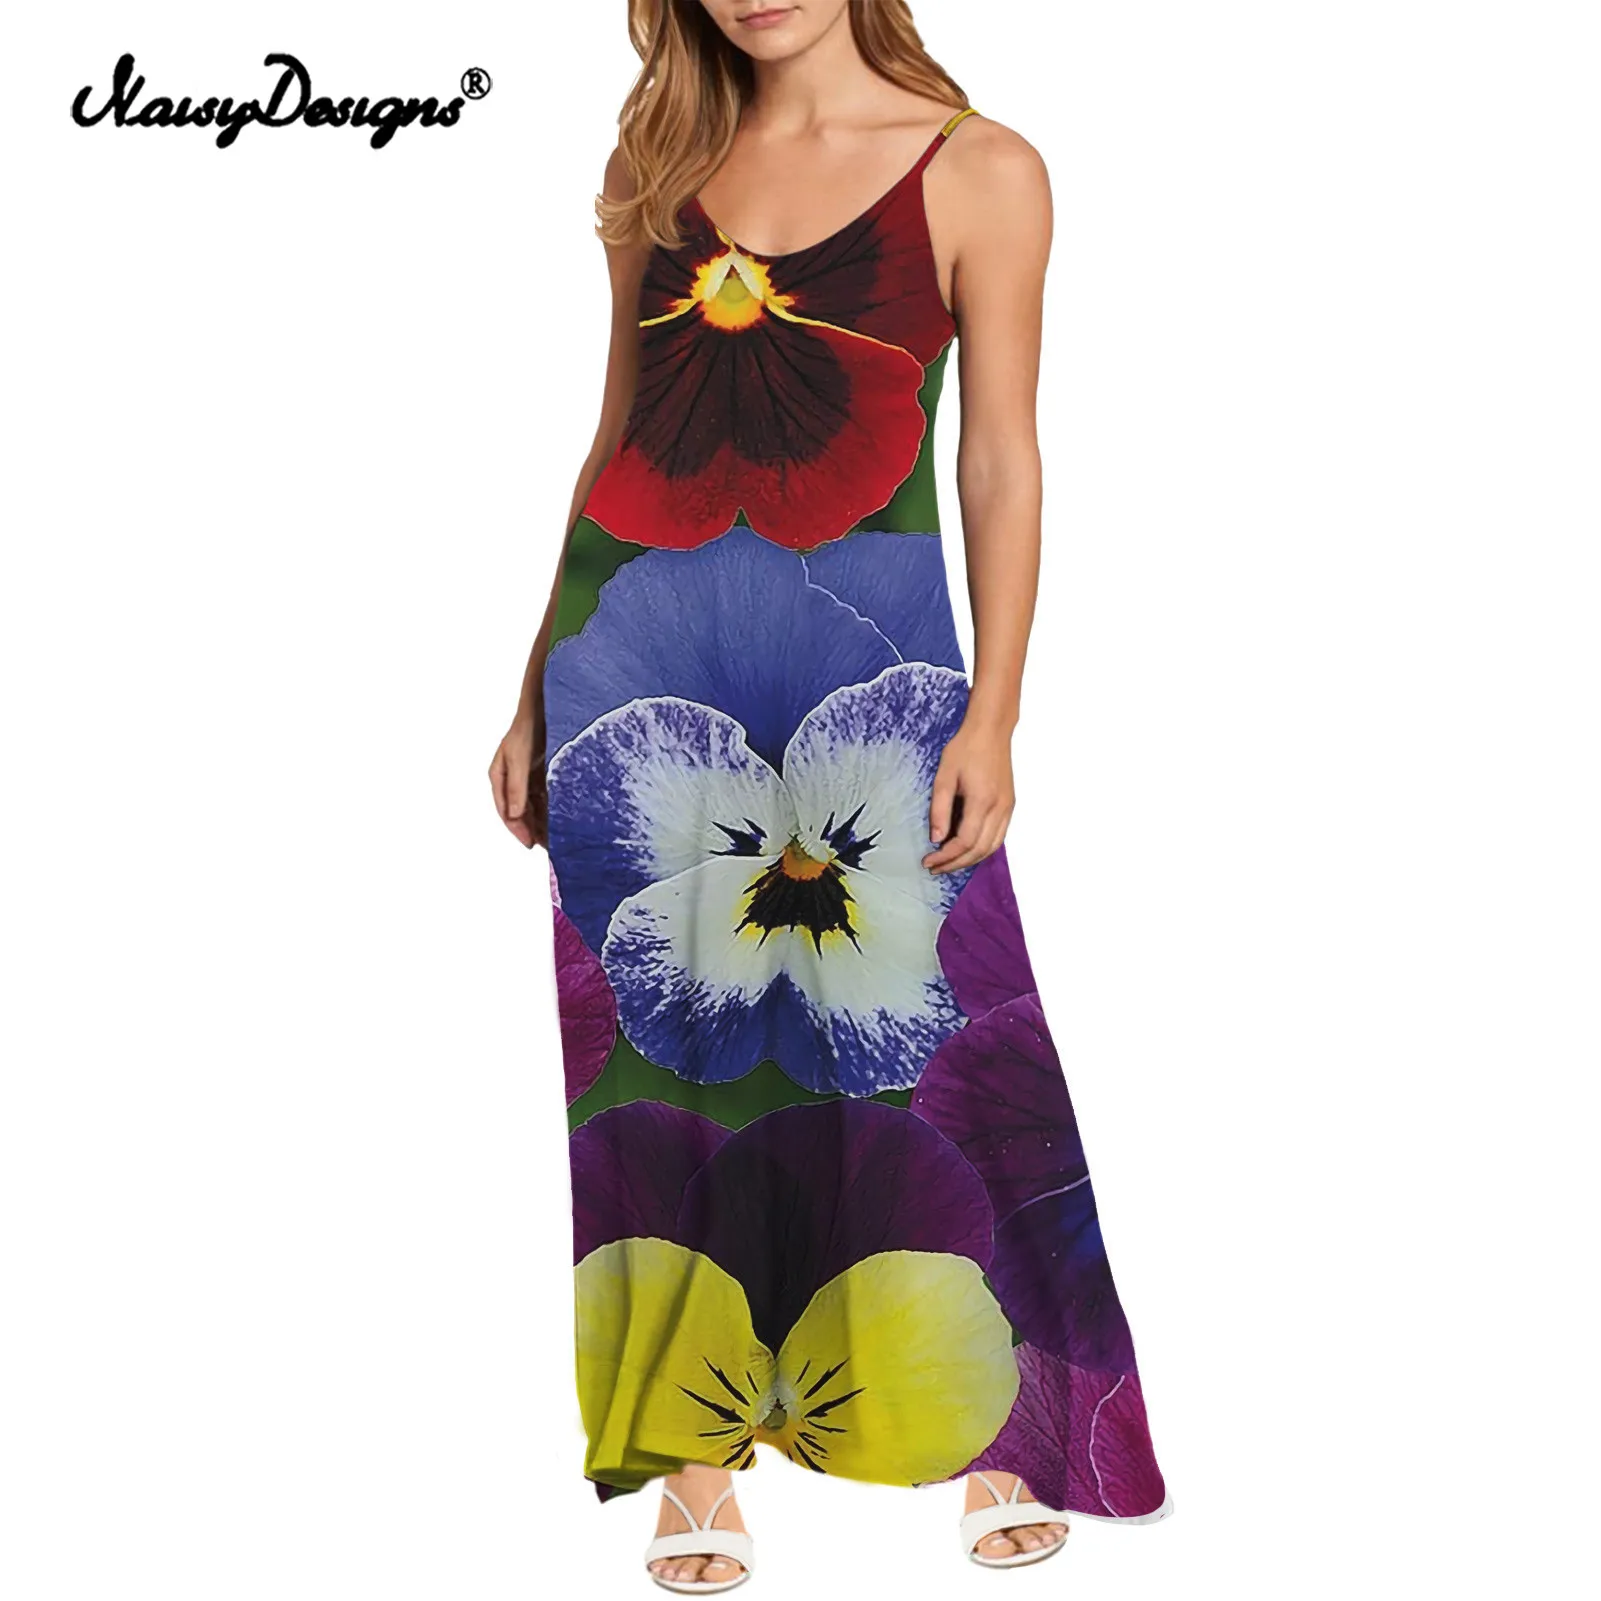 Noisydesigns Summer Holiday Dress Spaghetti Strap Colorful Pansy Flowers Prints Beach Style Ankle-Length Women Dresses Soft